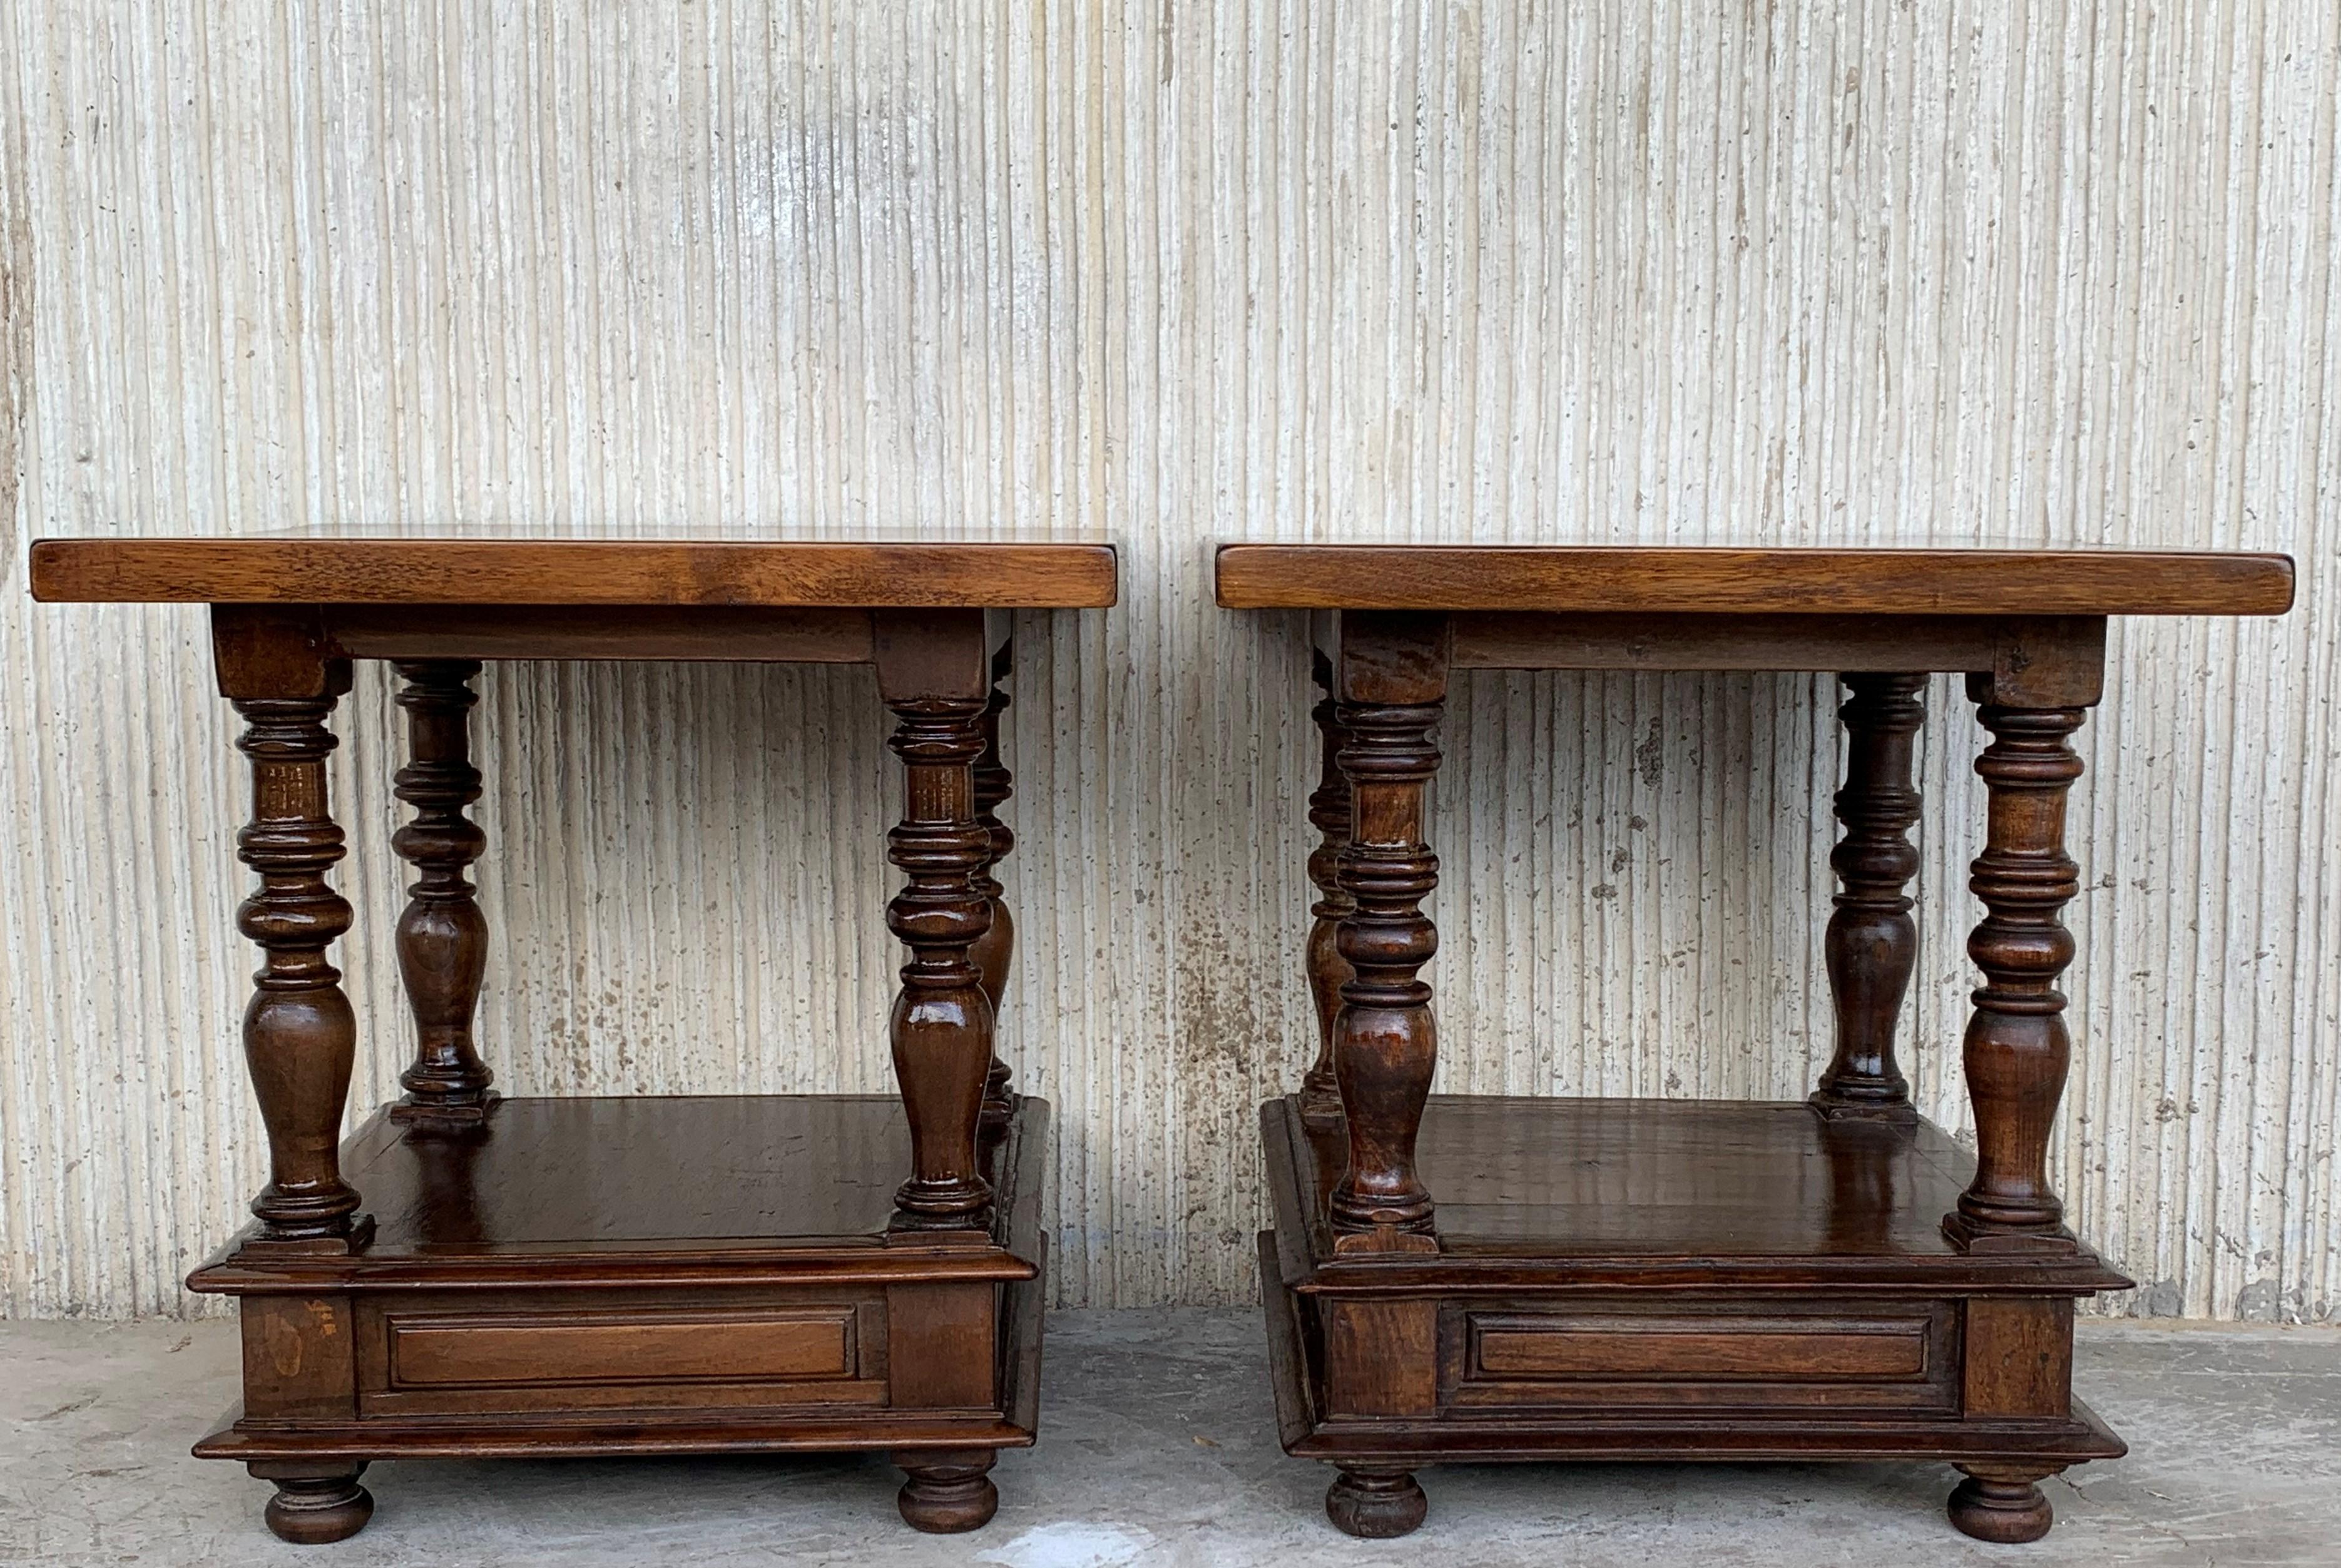 20th century Spanish colonial pair of square solid walnut coffee tables with low shelve.